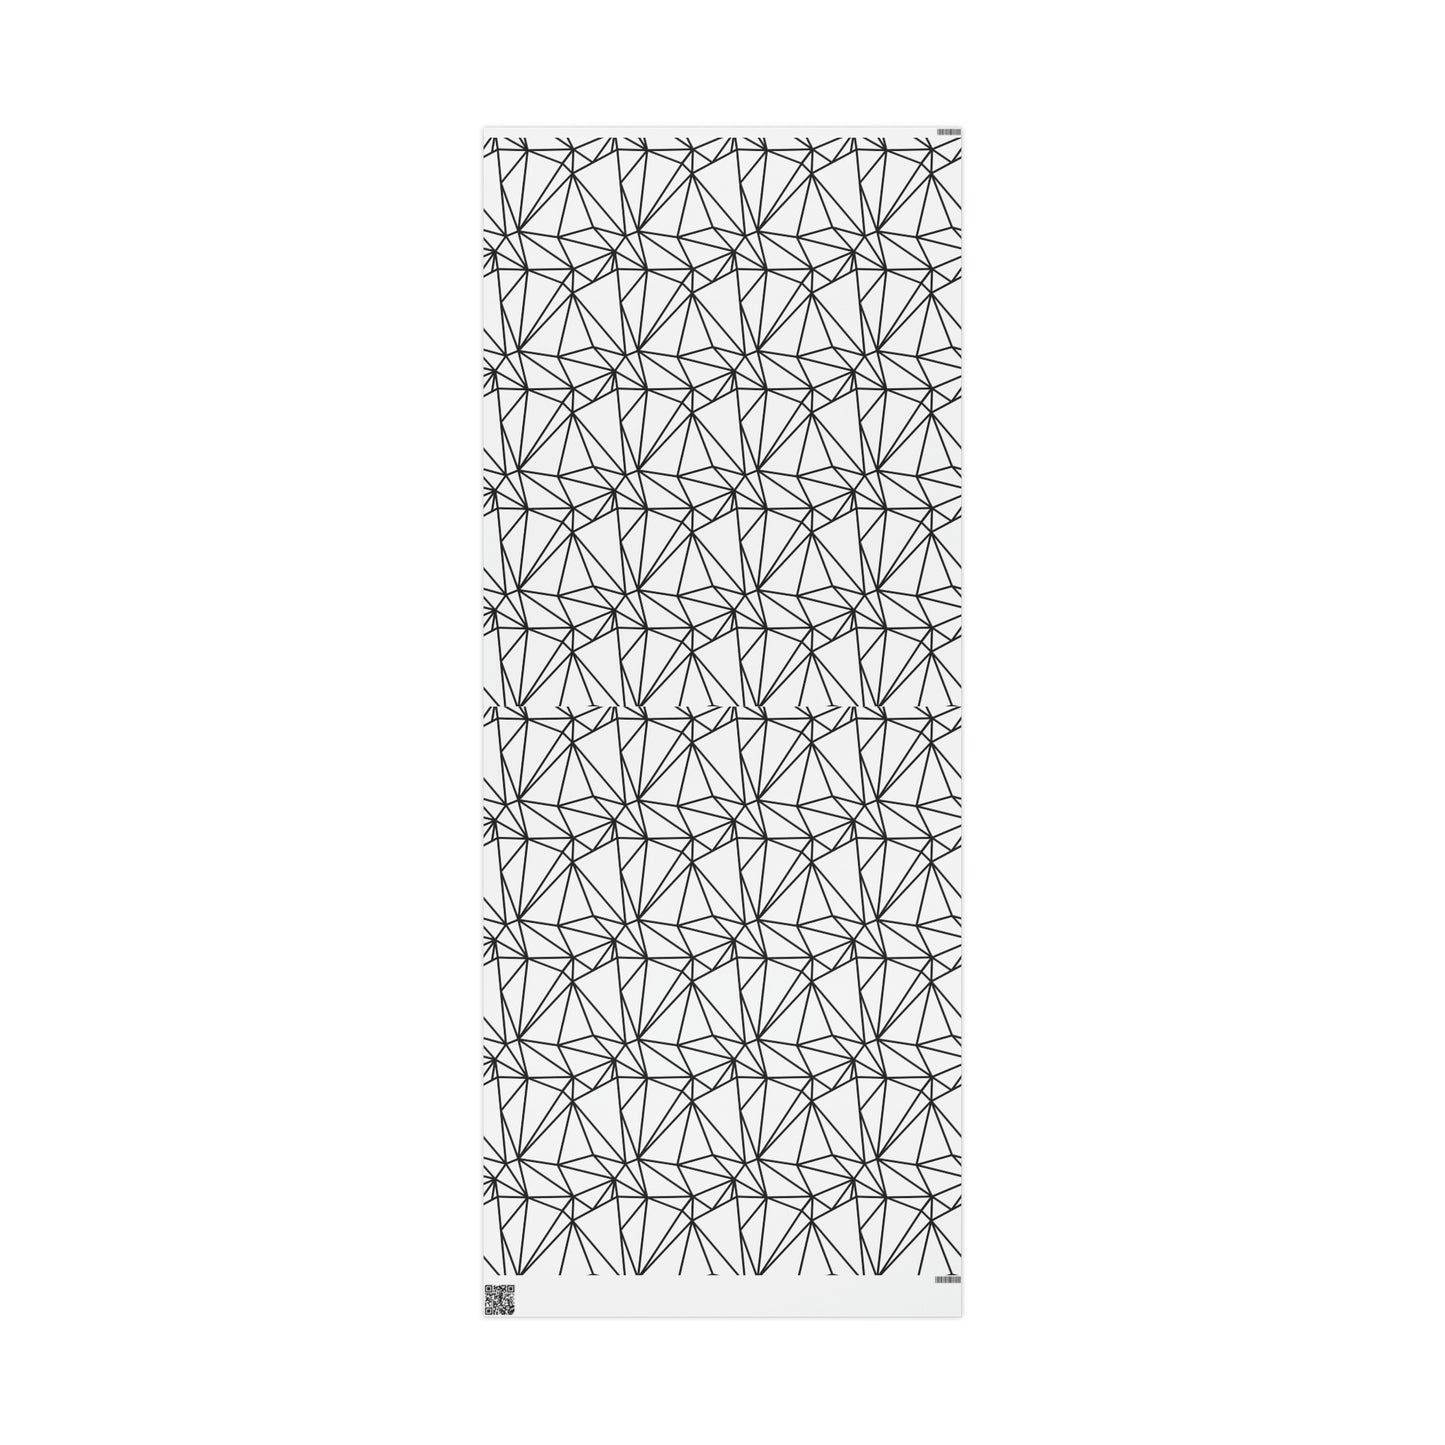 Black and White Poly Pattern Wrapping Paper for Gifts - Poly Shape Pattern Gift Wrap Paper